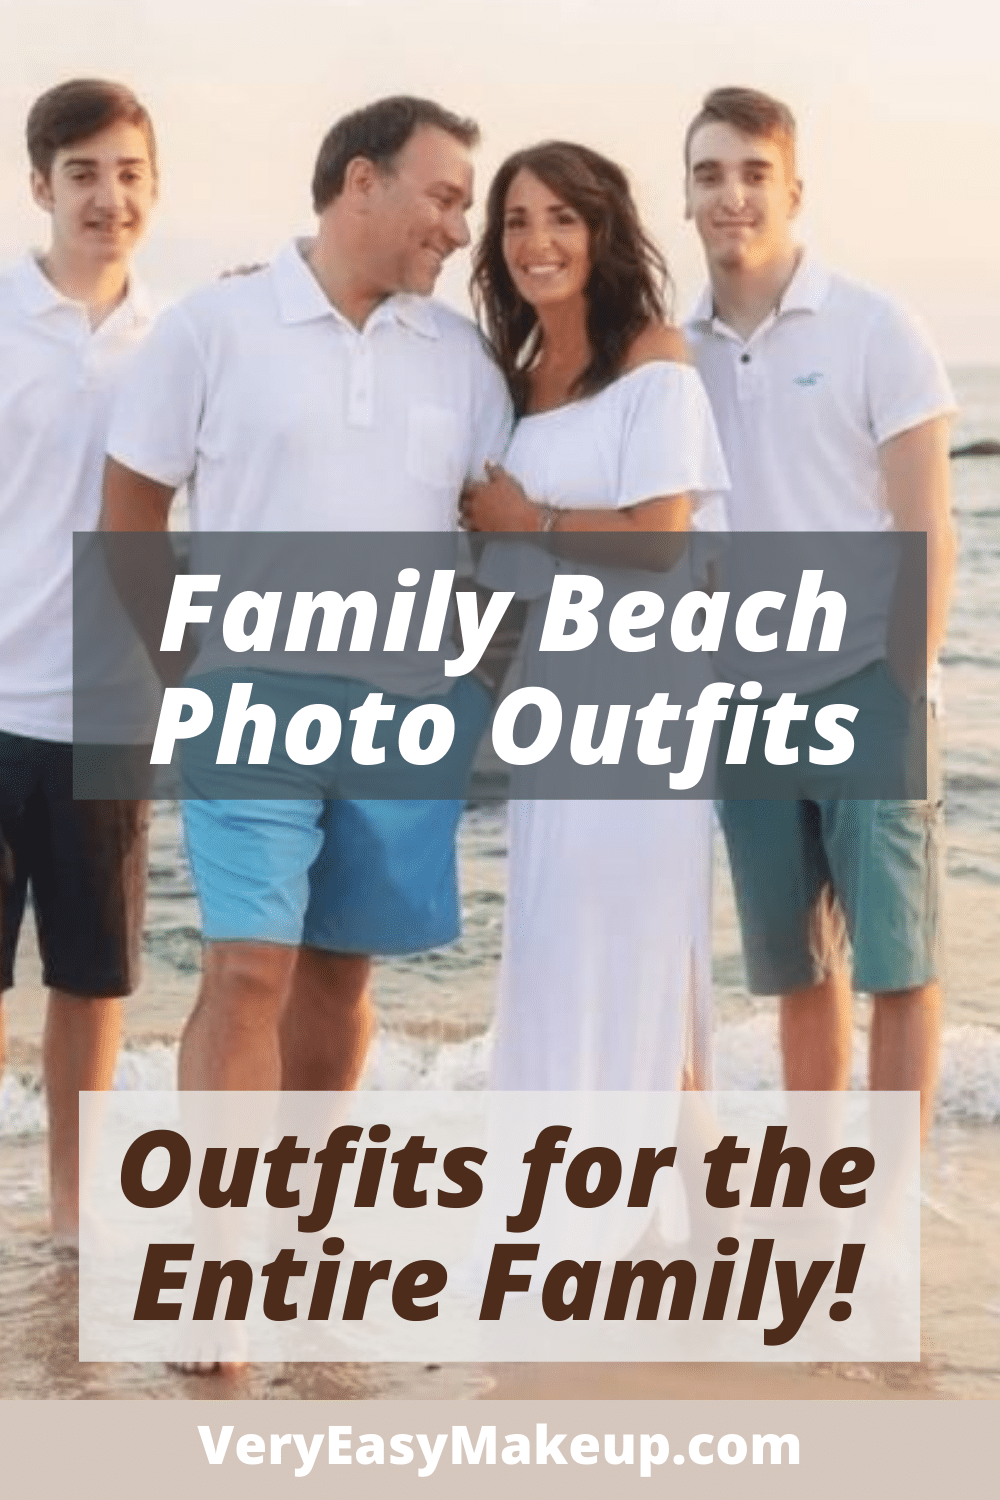 Family Beach Photo Outfits by Very Easy Makeup